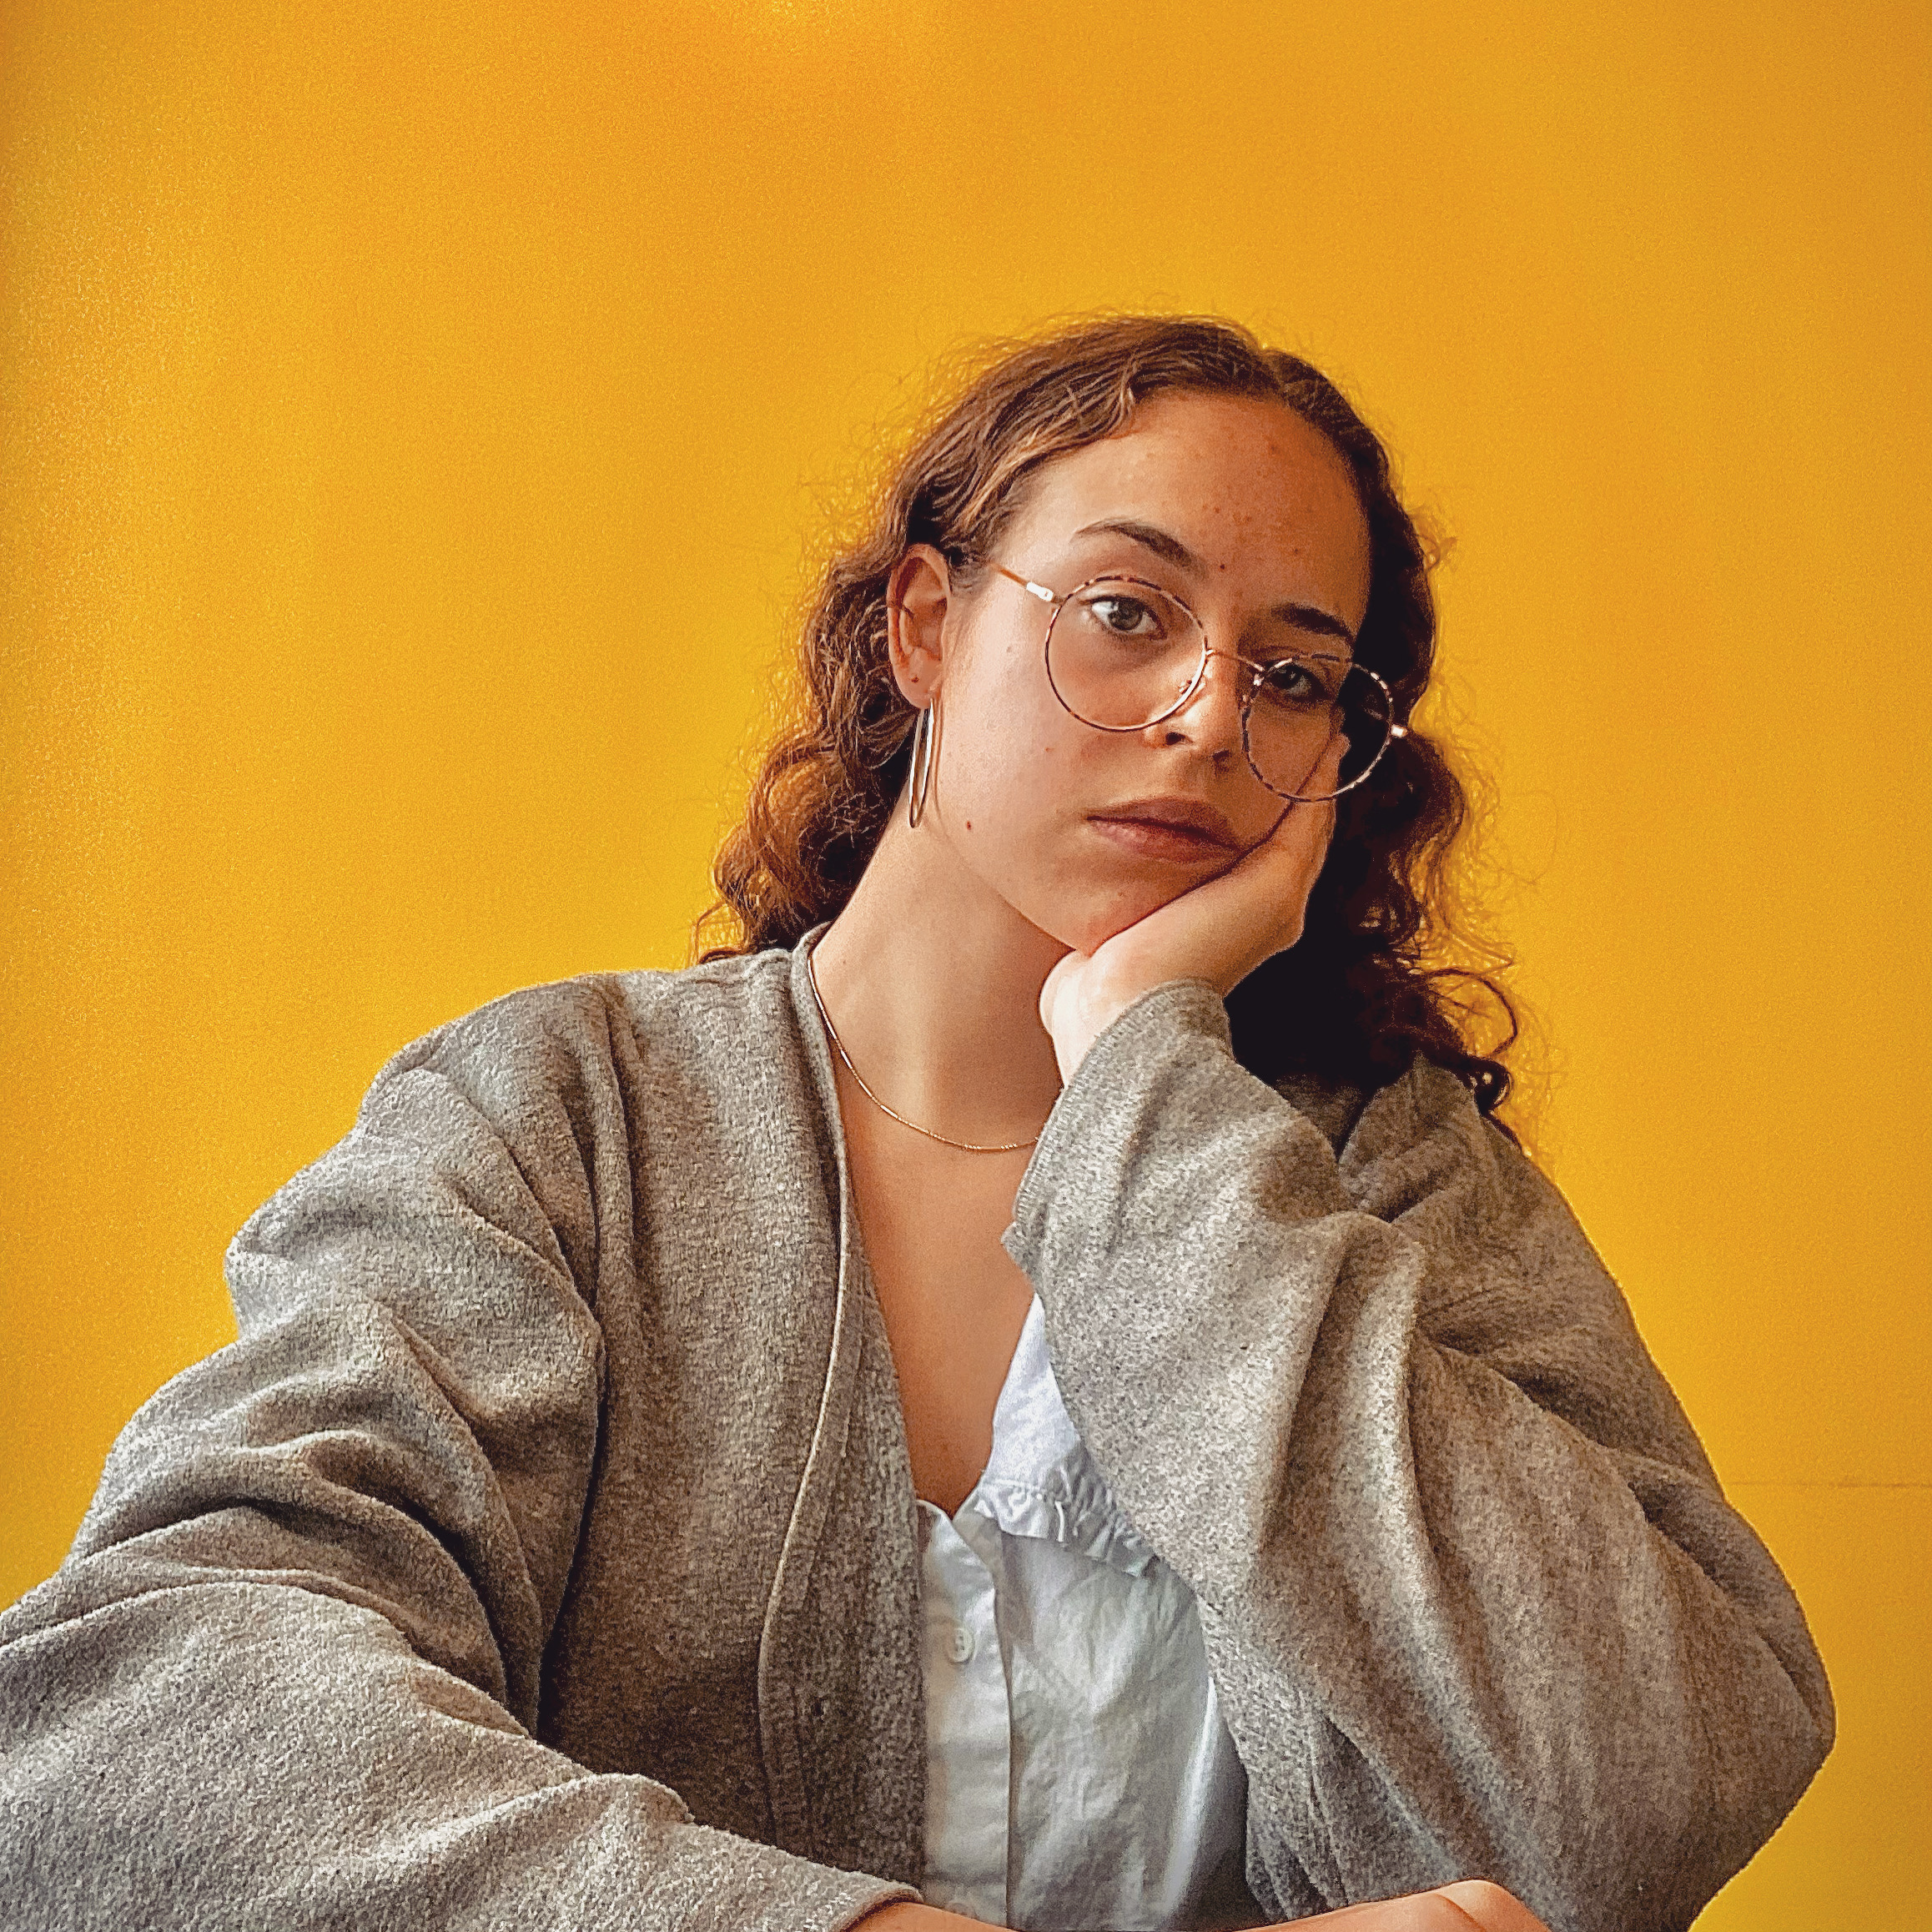 HerOrangeCoat main image: the artist with her hand on her chin against an orange background. She is wearing a grey cardigan and white shirt, and has glasses and curly hair.